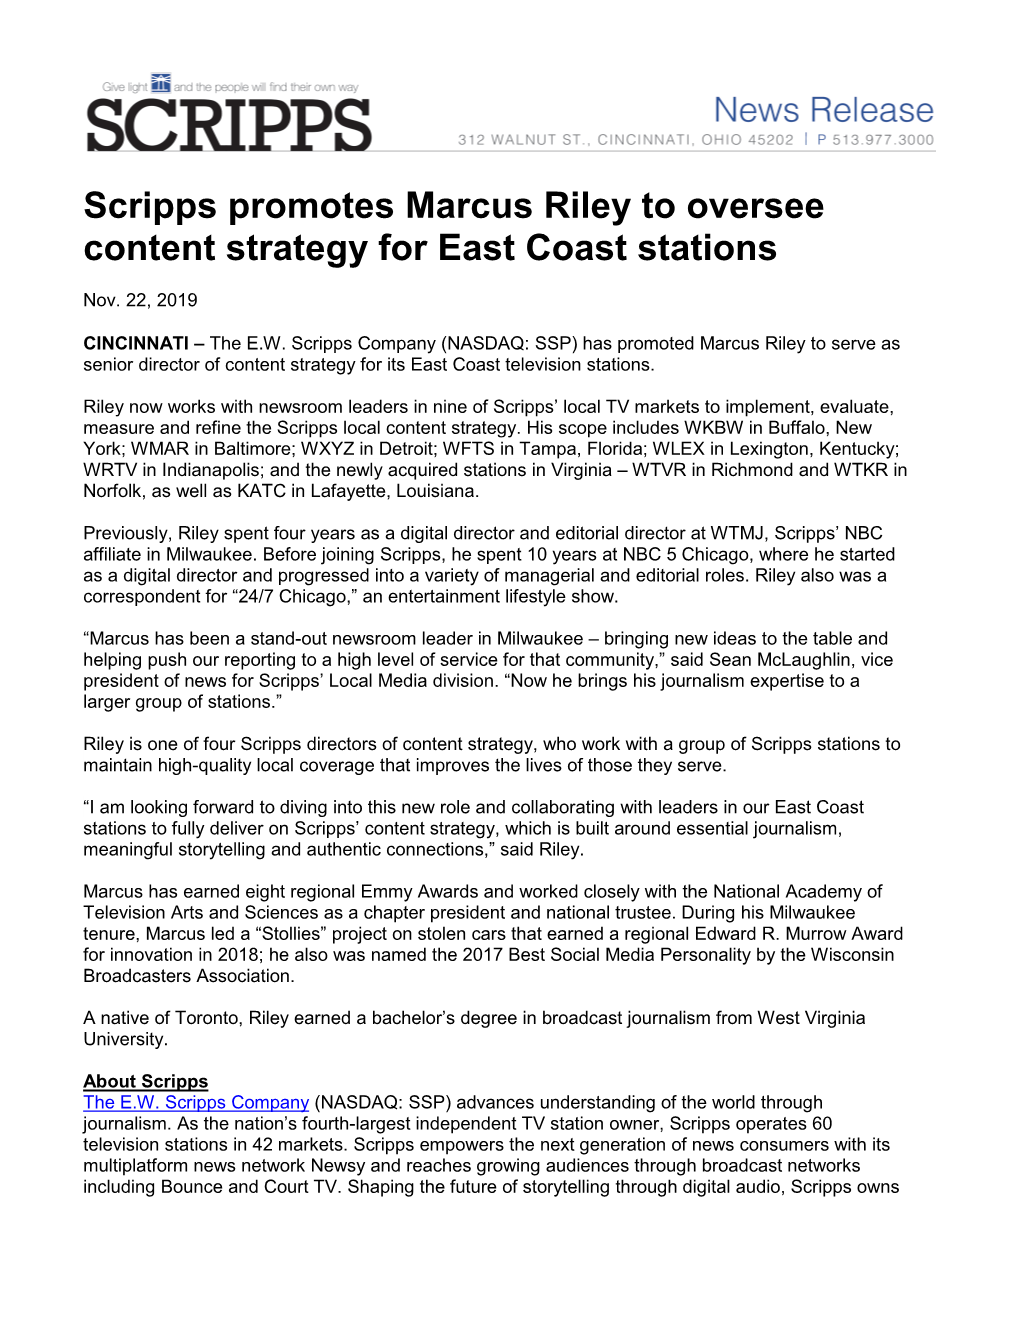 Scripps Promotes Marcus Riley to Oversee Content Strategy for East Coast Stations